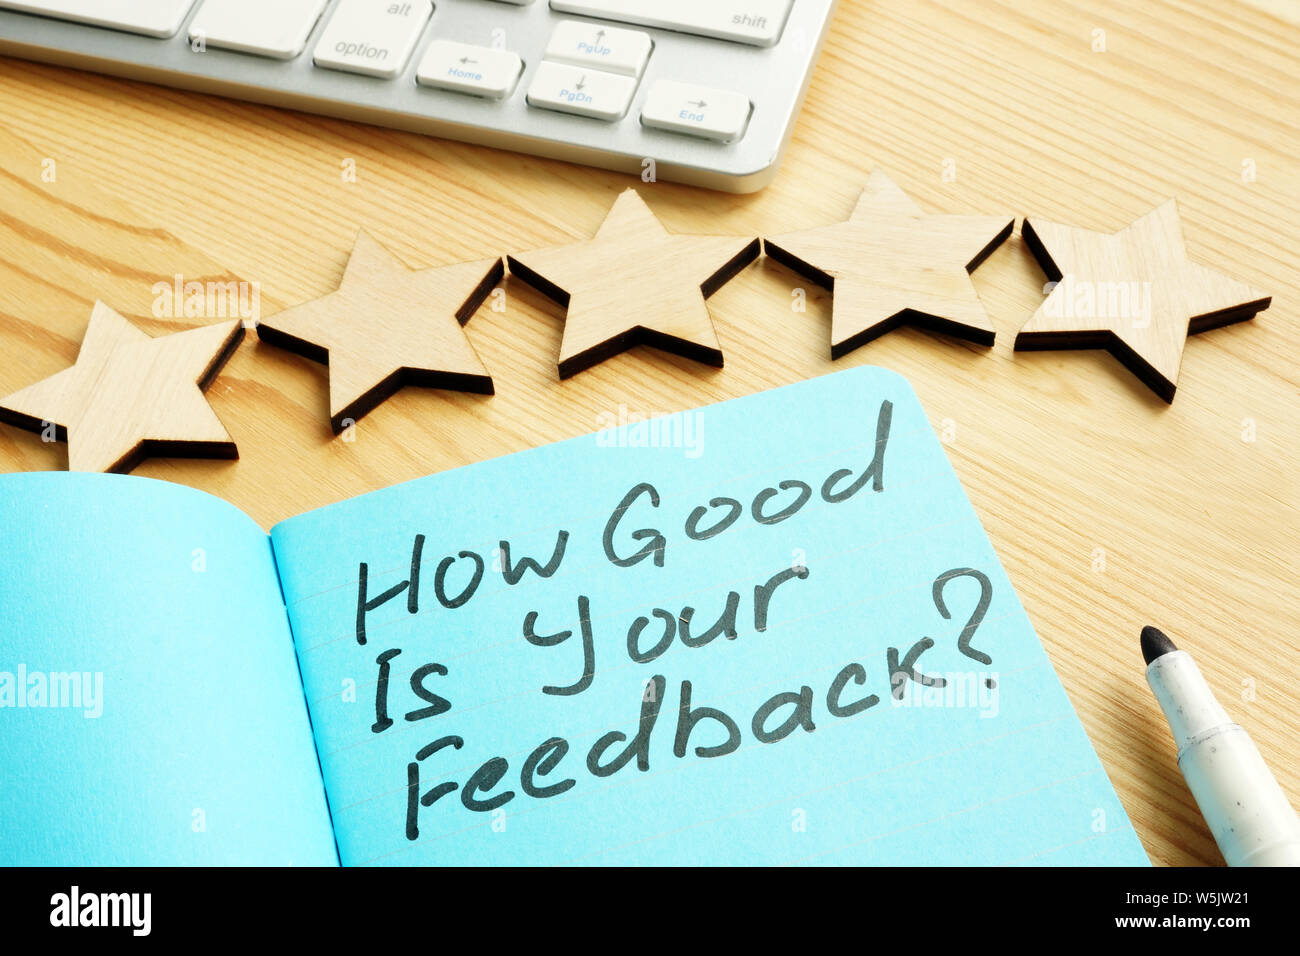 How Good Is Your Feedback sign and five stars for assessment. Stock Photo